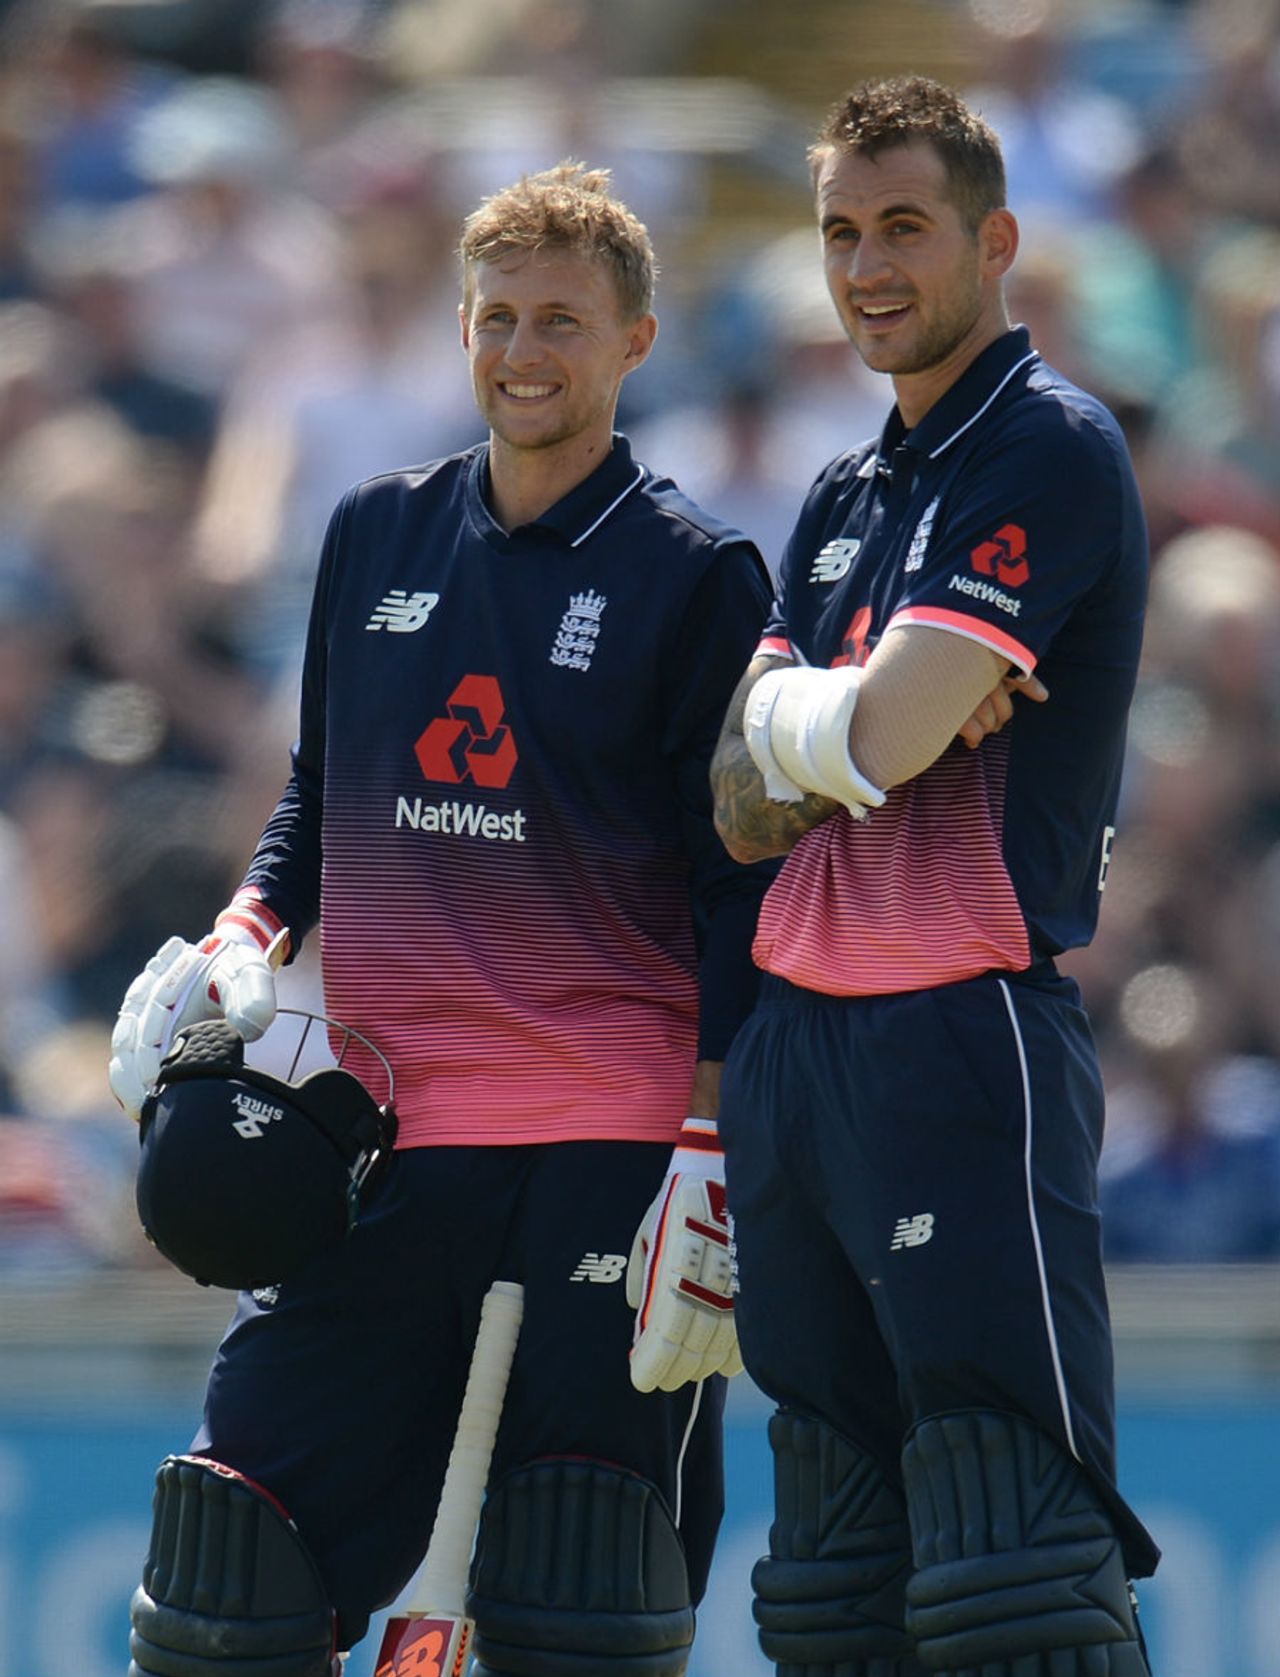 Joe Root and Alex Hales take a breather during their second-wicket stand, England v South Africa, 1st ODI, Headingley, May 24, 2017